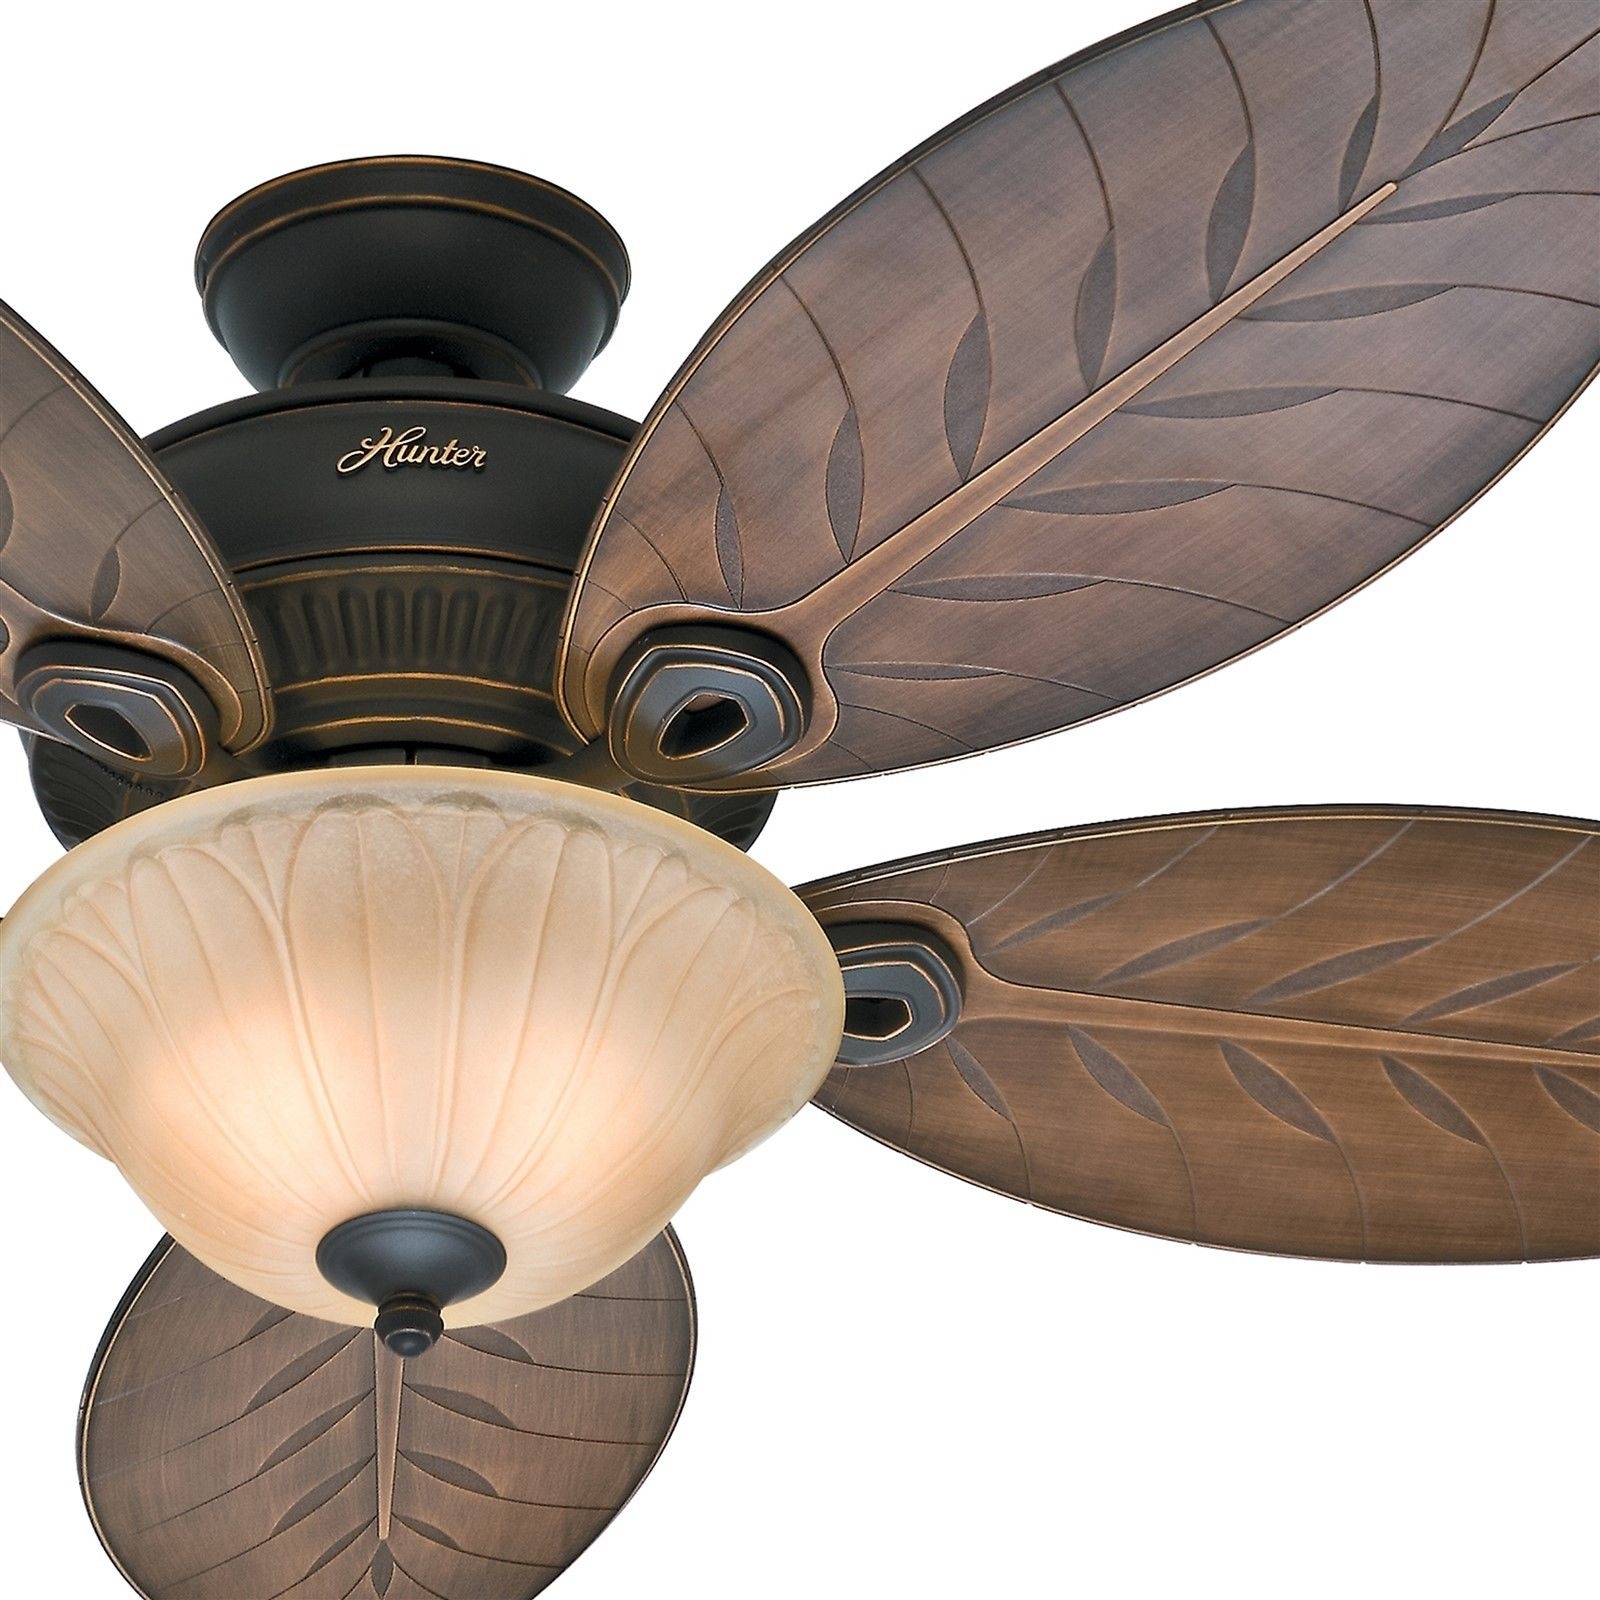 Hunter Tropical Ceiling Fans With Lightshunter tropical ceiling fans with lights bathroom fans and